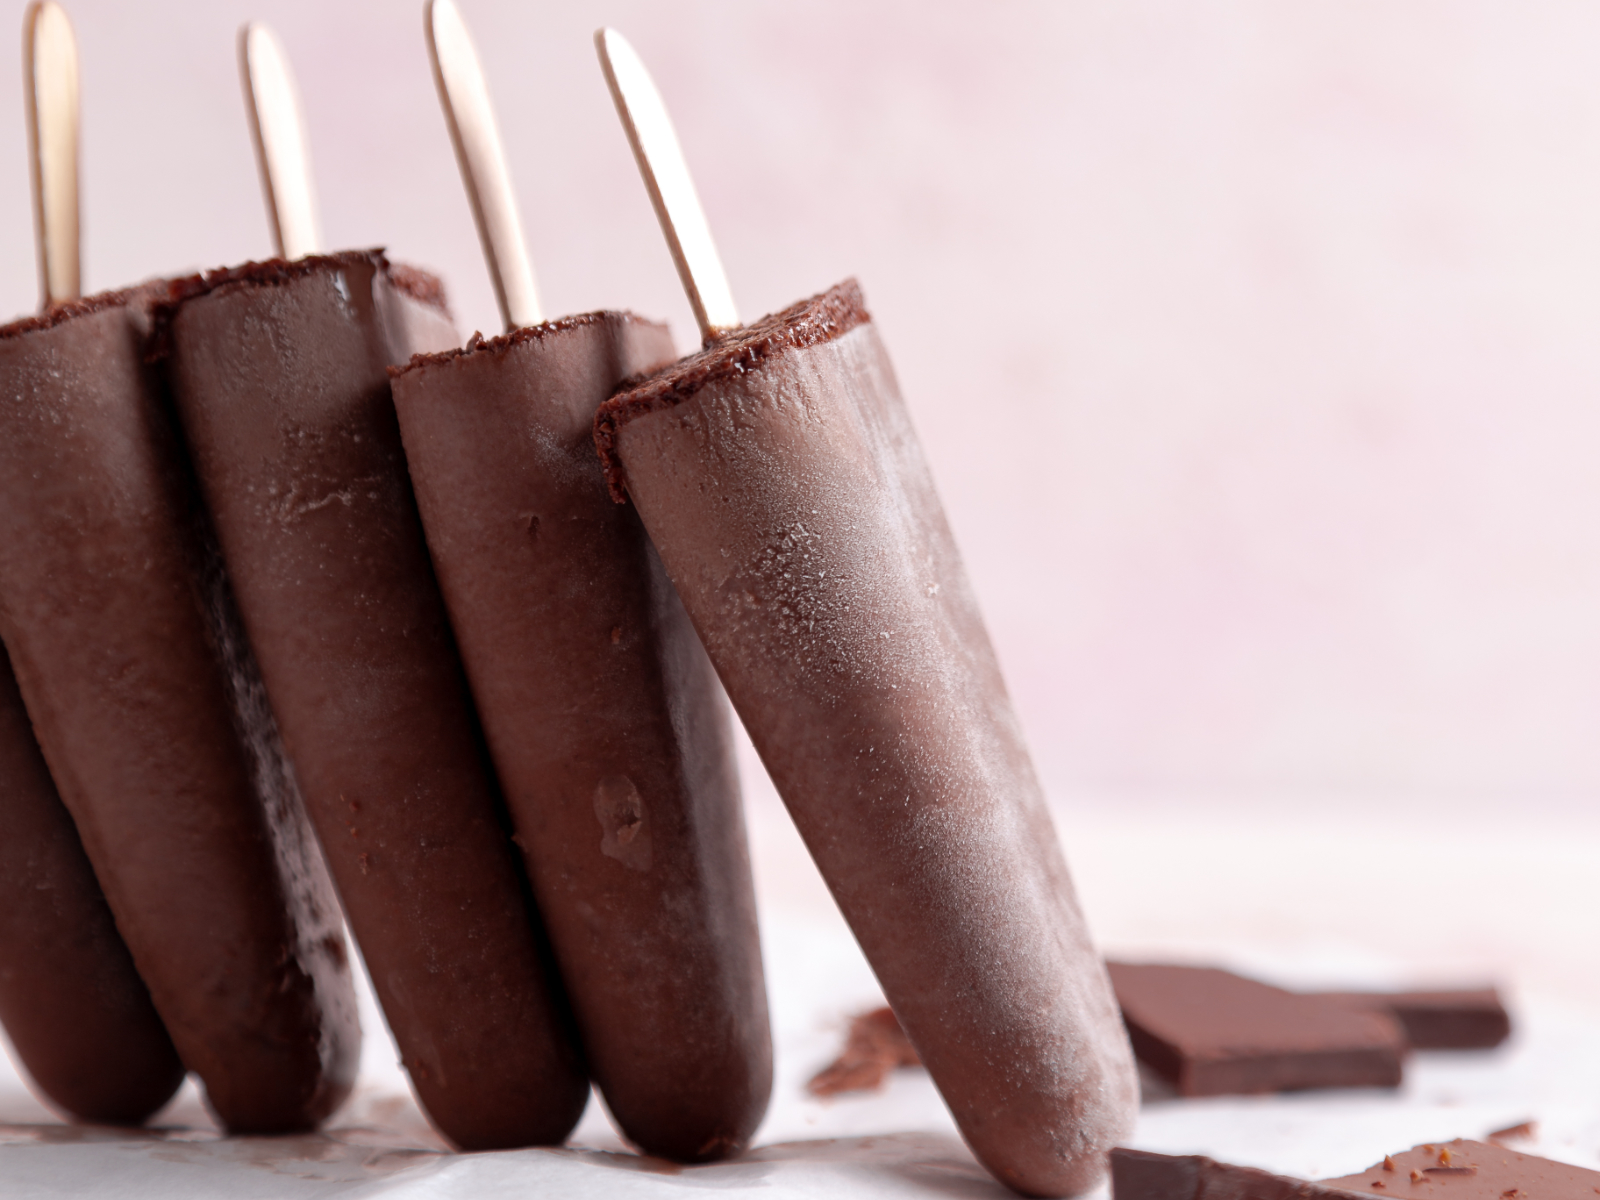 chocolate fudge pops stacked together on a table